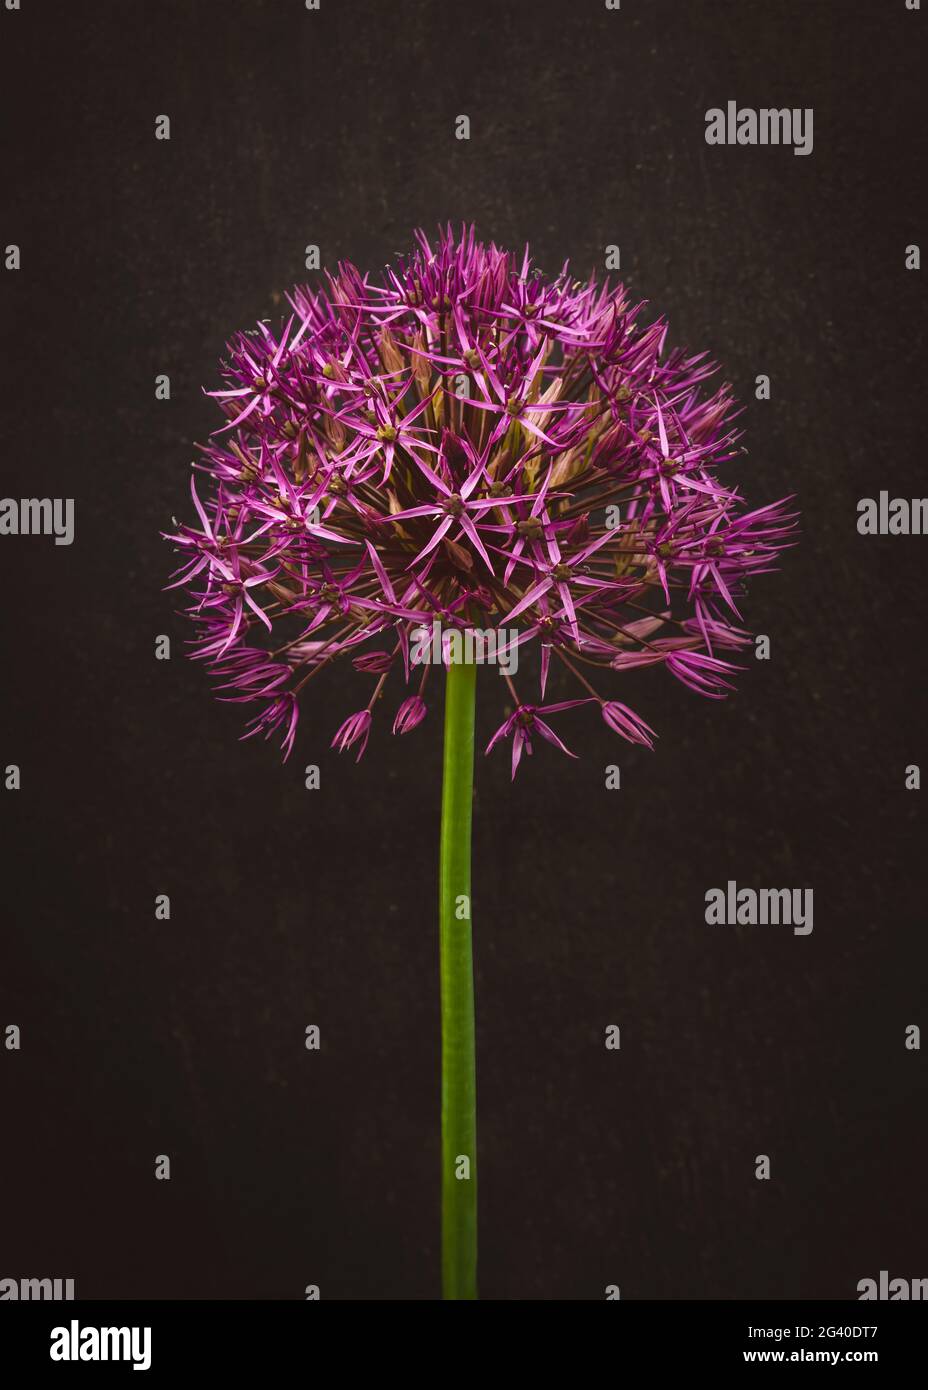 Artistic image of an purple Allium flower cultivated garlic,  with a textured background,  graphic resources such as posters and backdrops, copy space Stock Photo